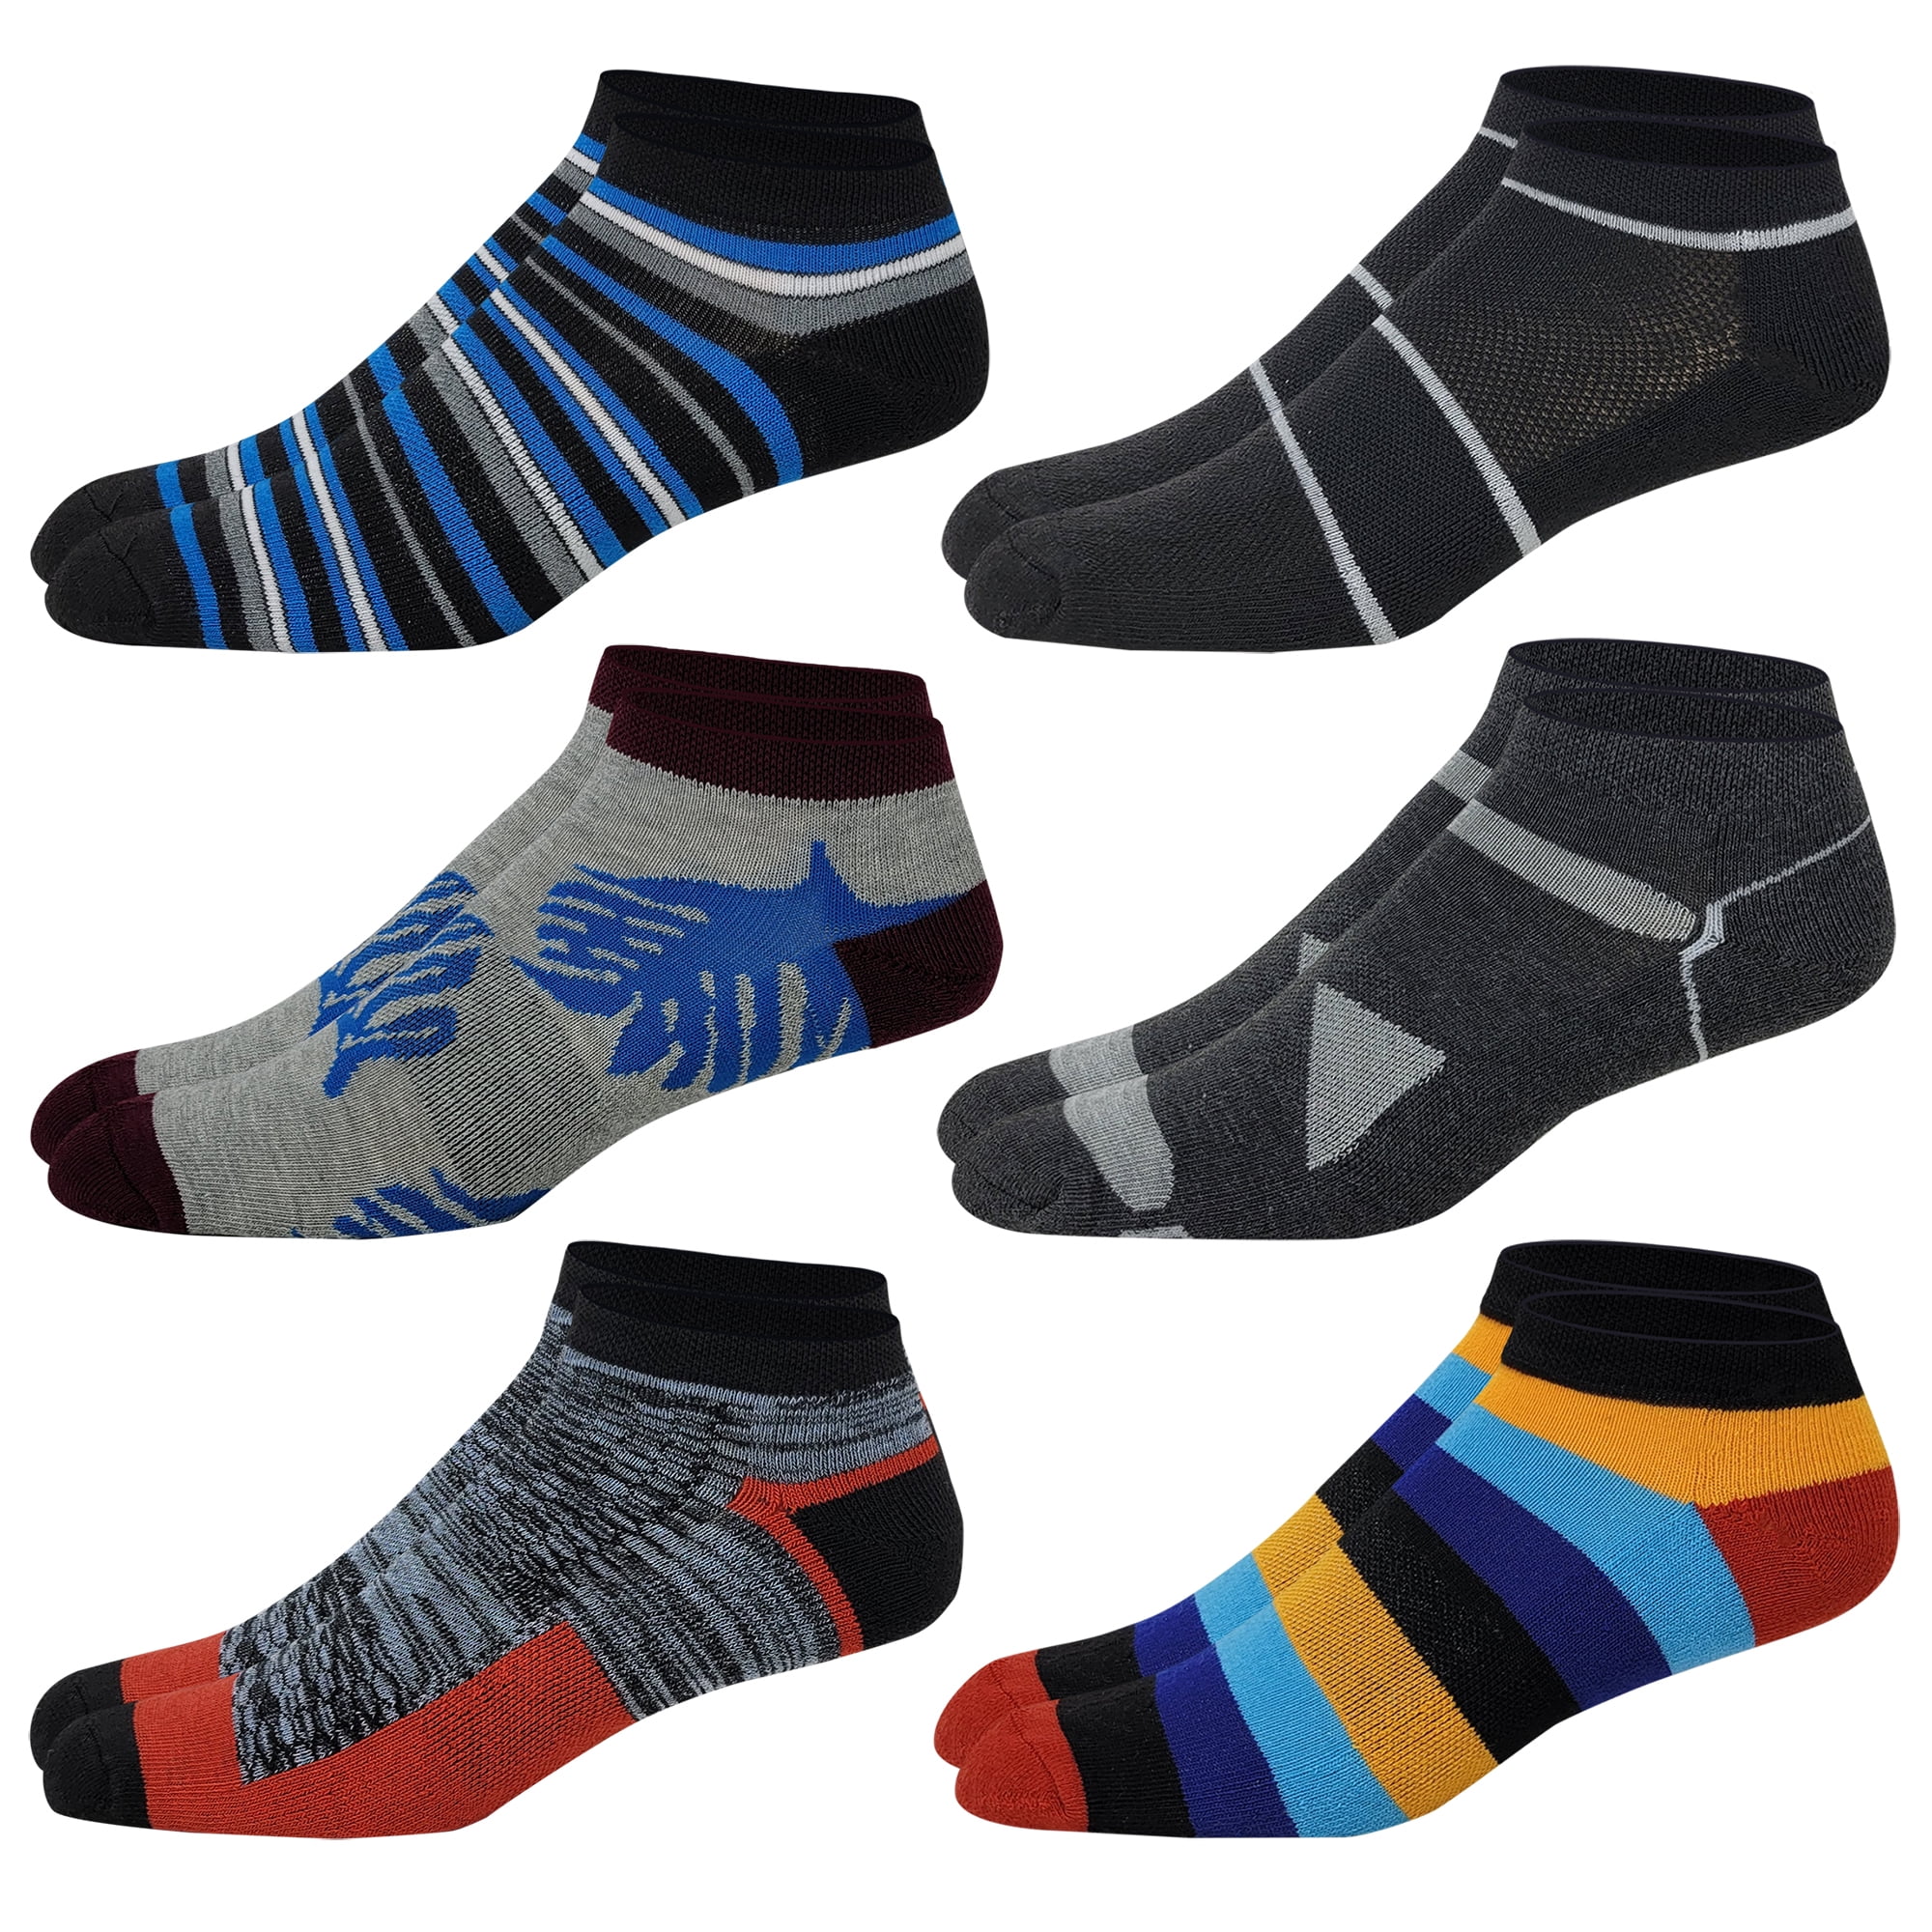 Different Touch 6 Pairs Men's Ankle Athletic Cushion Low Cut Sports ...